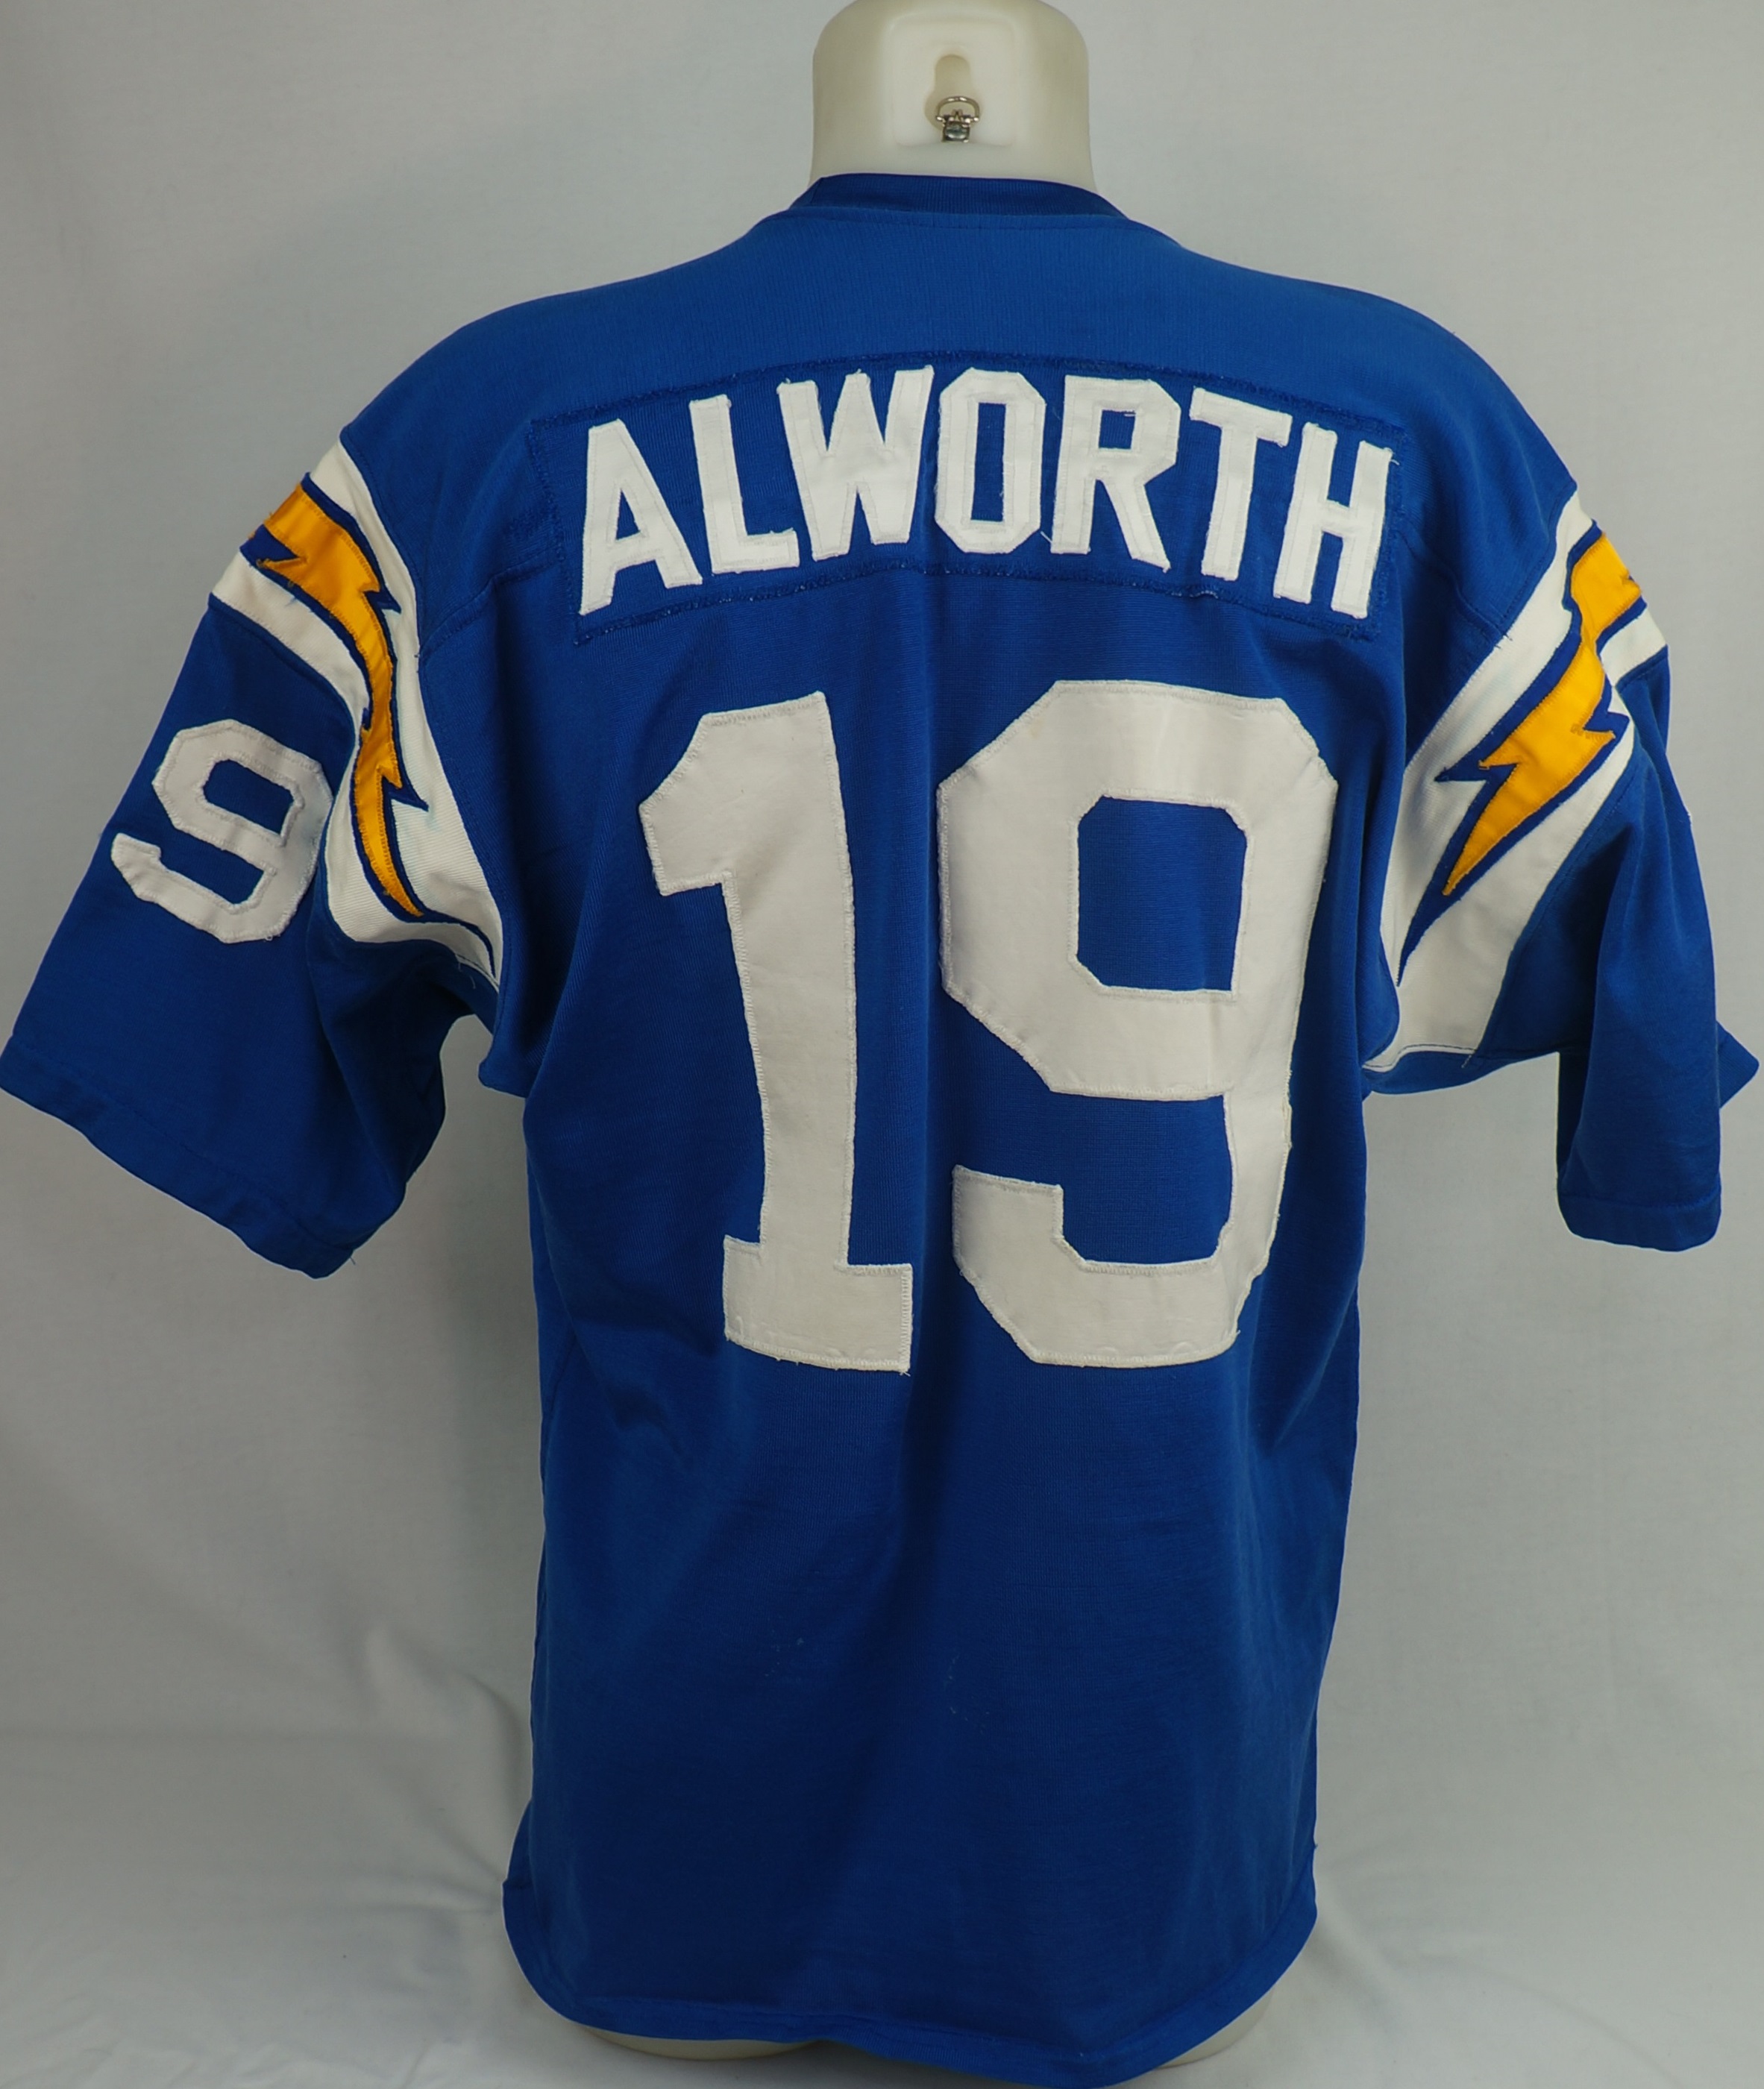 Lance Alworth Chargers Throwback Jersey